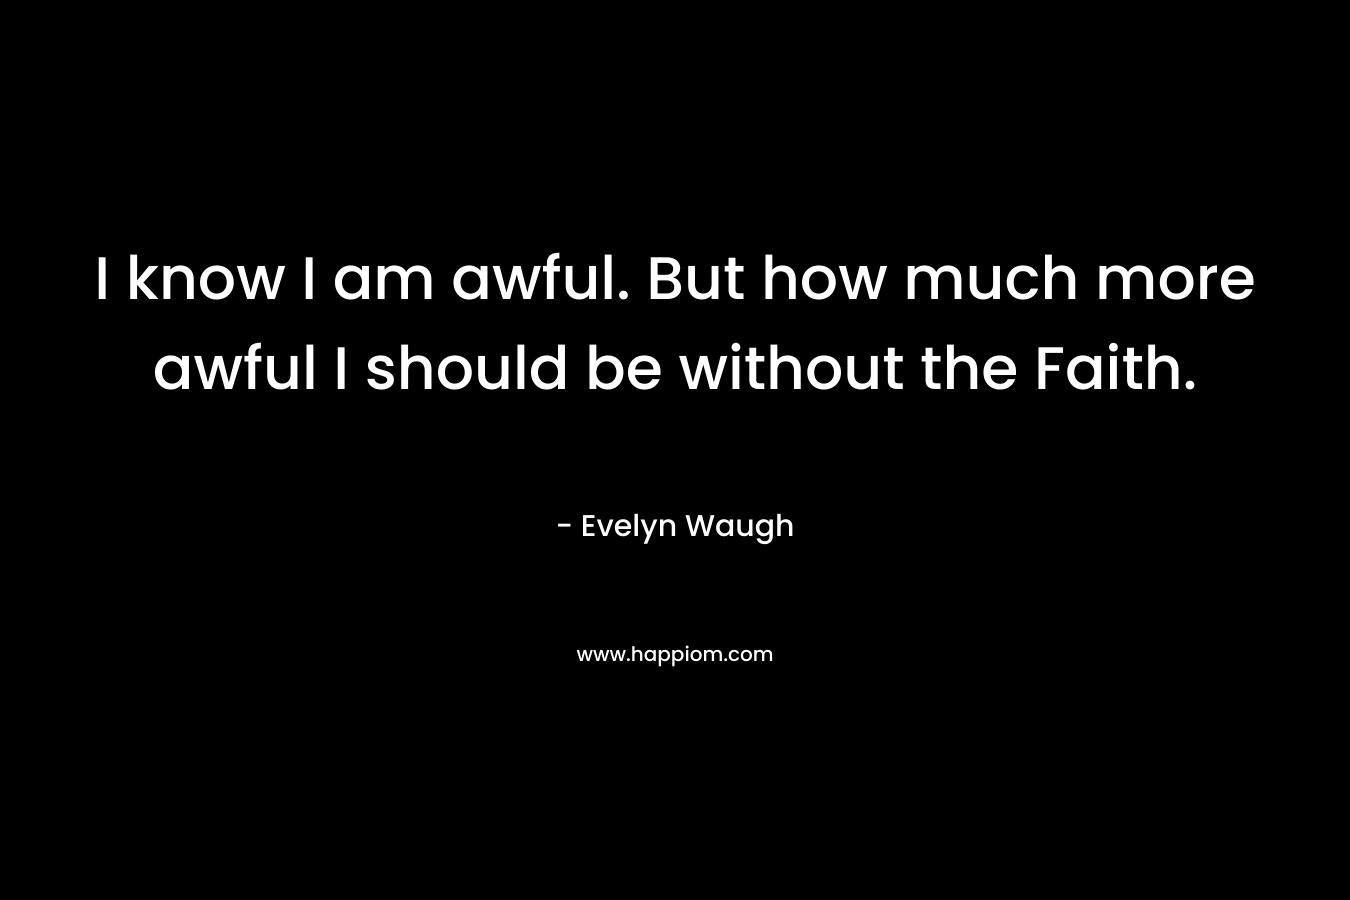 I know I am awful. But how much more awful I should be without the Faith.